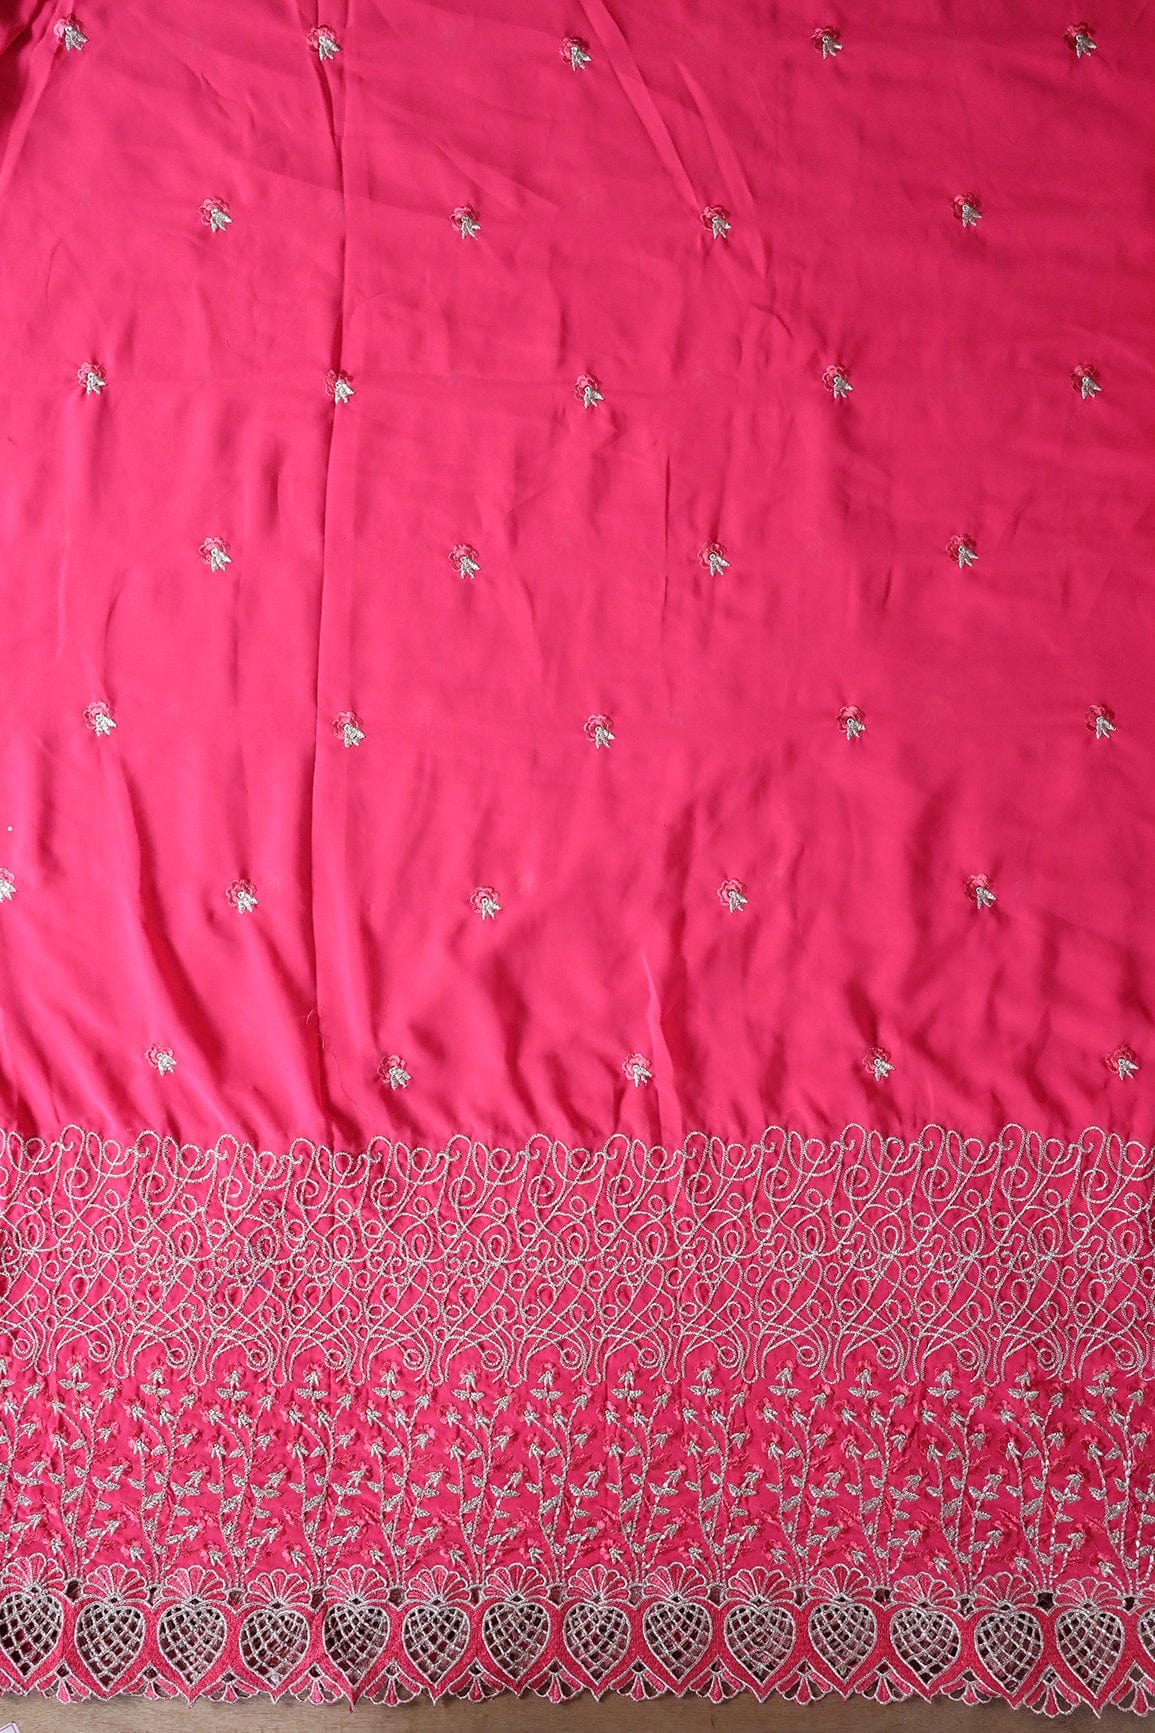 Big Width''56'' Pink Thread With Zari Floral Embroidery Work On Gajri Pink Georgette Fabric With Border - doeraa